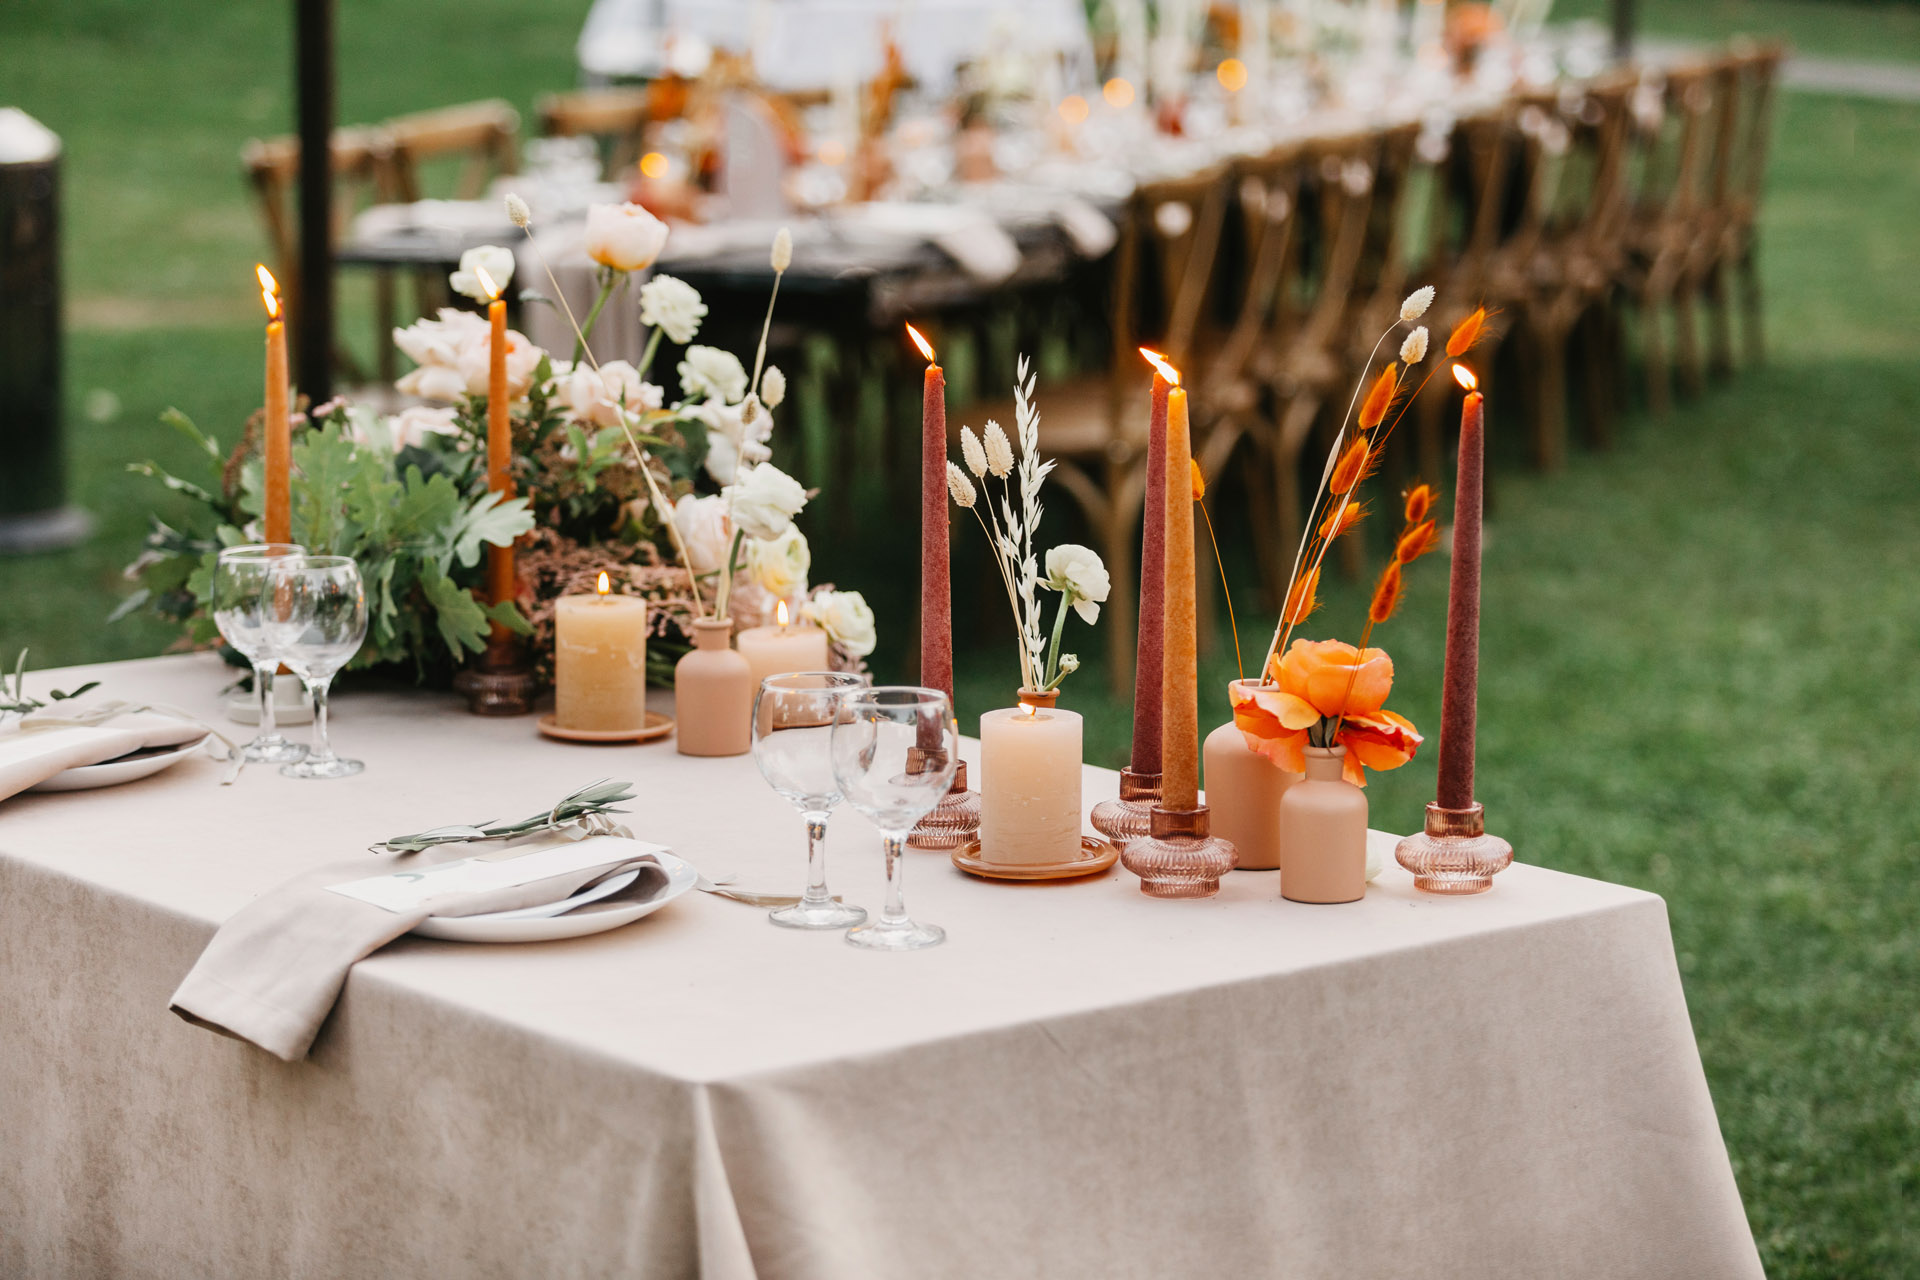 tabletop candles and wedding decorations